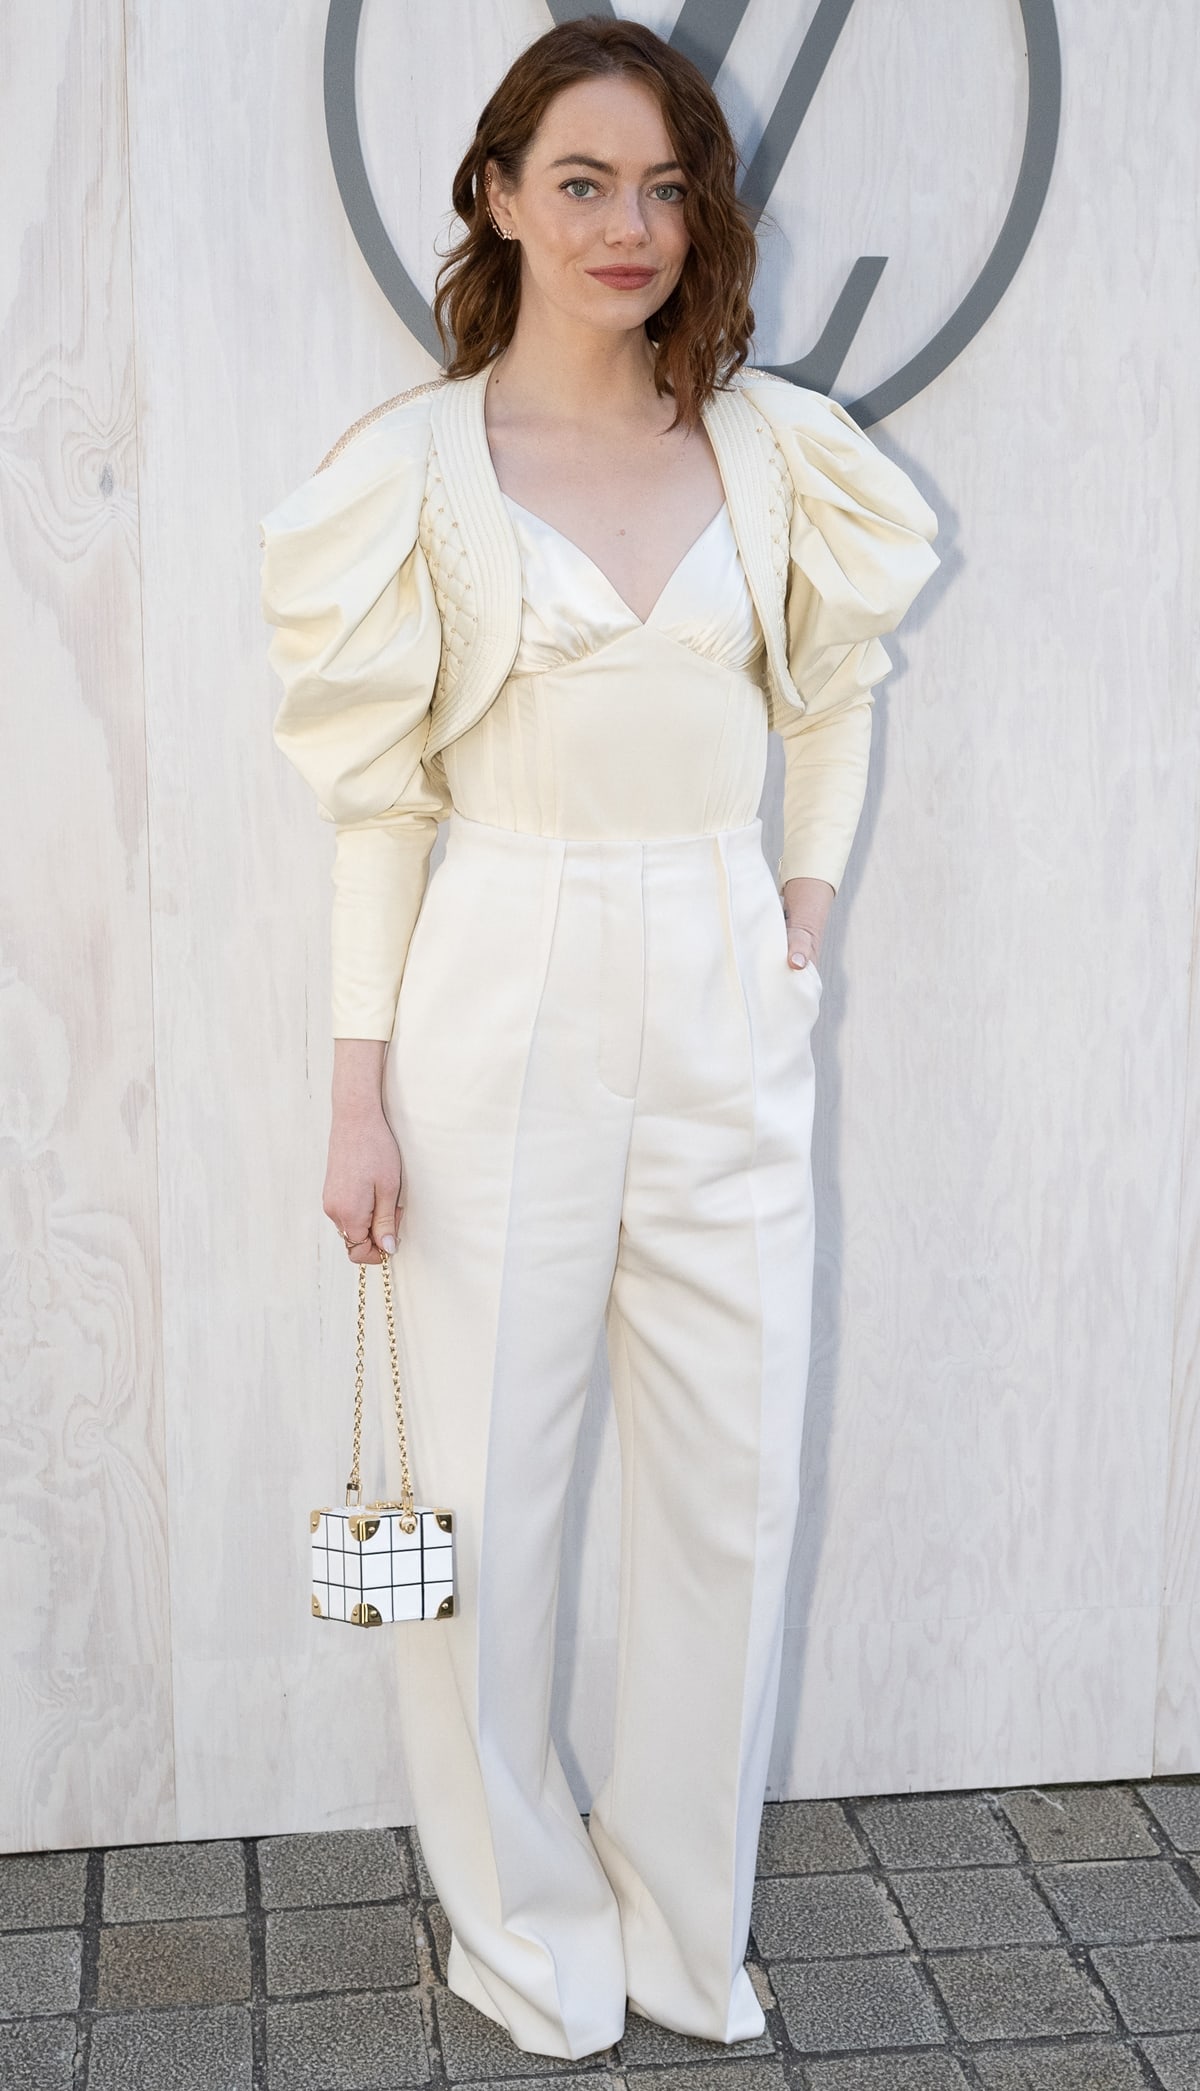 Emma Stone channels her character Bella Baxter at the Louis Vuitton PFW show in a cream corset top, mini quilted puff-sleeve jacket, and white high-waisted slacks